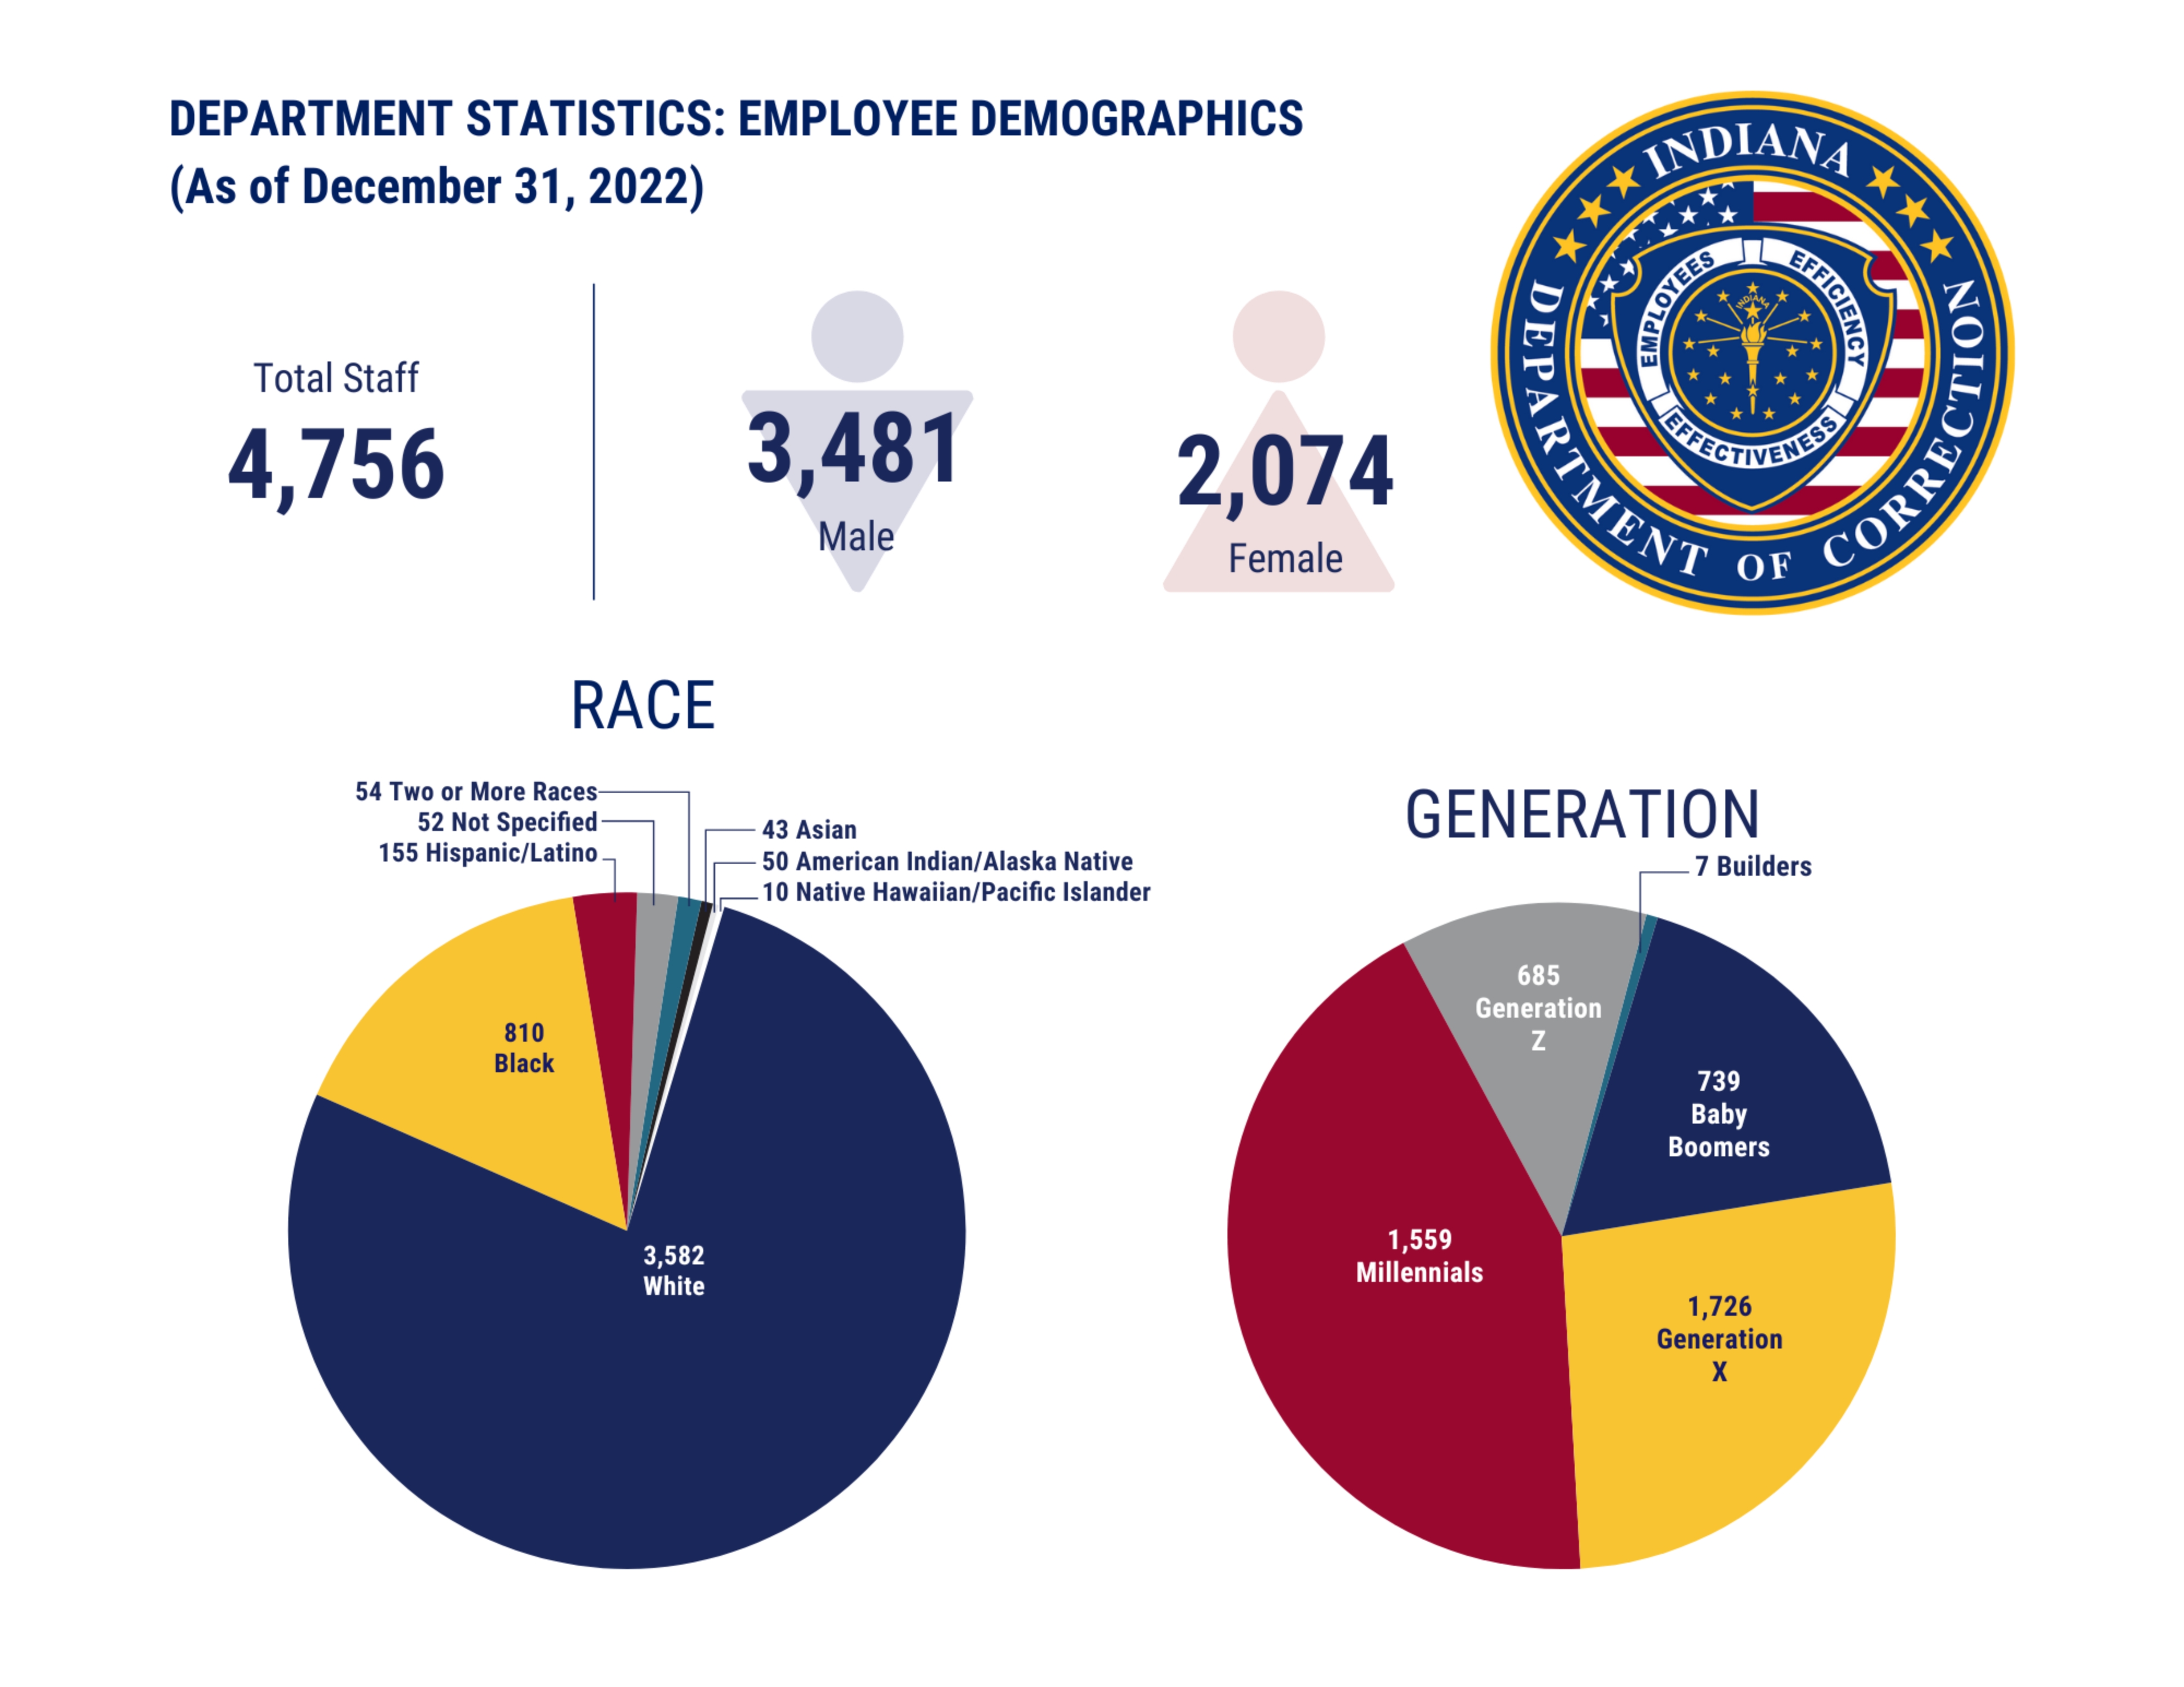 As of December 31, 2022 the department had 4,756 total staff of which 3,481 were male and 2,074 were female. Out of those employees 3,582 identify as white, 810 Black, 155 Hispanic/Latino, 43 Asian, 50 American Indiana/ Alaska Native, 10 Native Hawaiian/Pacific Islander, 54 were 2 or more races, and 52 were not specified.  Generationally speaking out of those employees 7 belong to the Builders generation, 739 Baby Boomers, 1,726 Gen X, 1,559 Millennials, and 685 Gen Z.